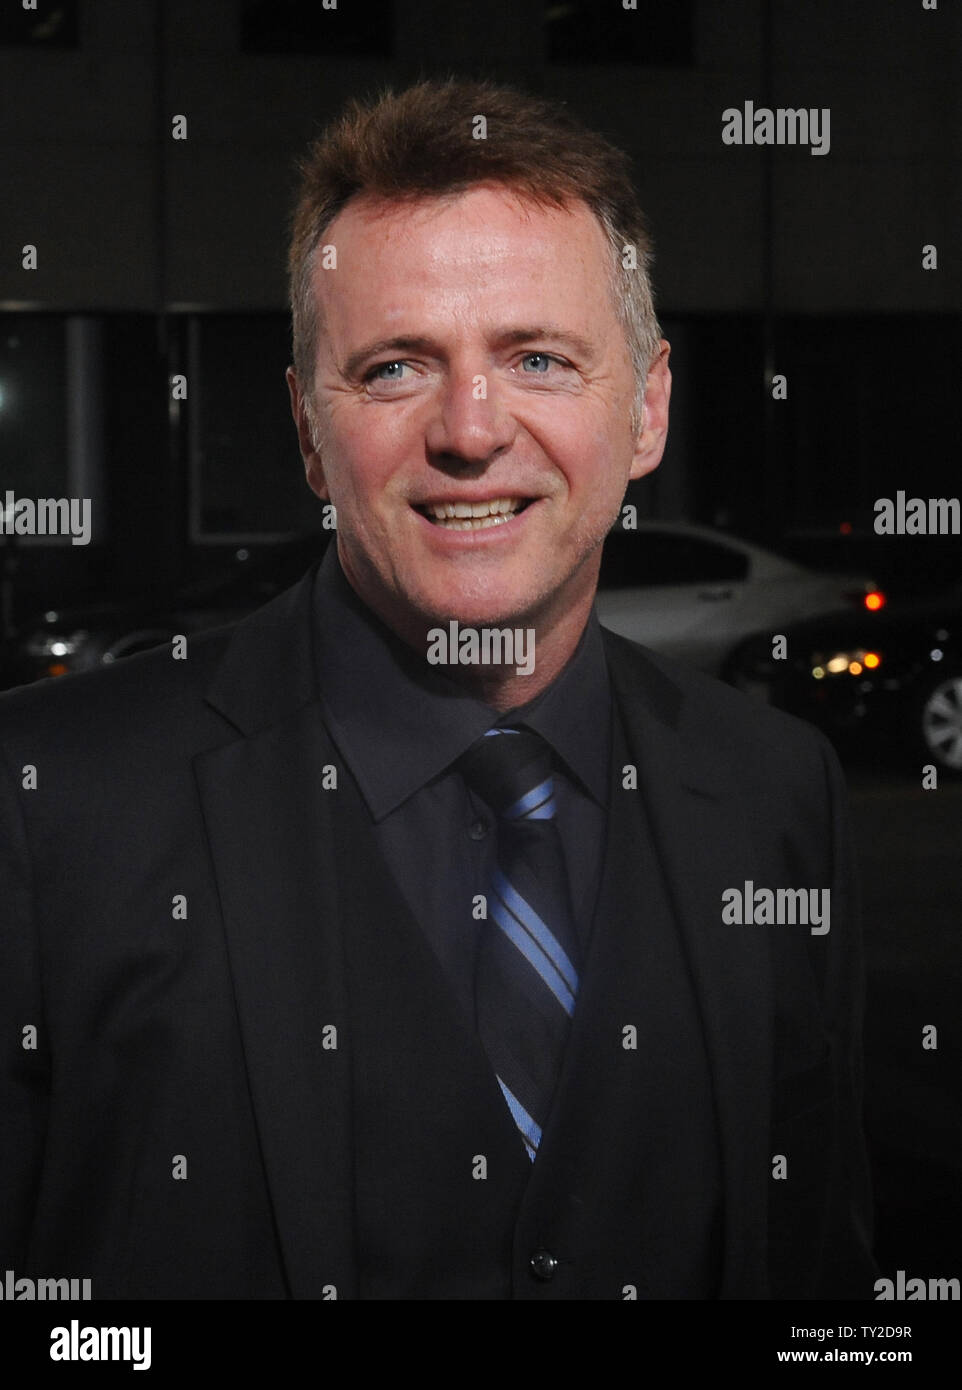 Actor Aidan Quinn attends the premiere of the motion picture dramatic comedy 'The Descendants', at the Academy of Motion Picture Arts & Sciences, in Beverly Hills on November 15, 2011.  UPI/Jim Ruymen Stock Photo